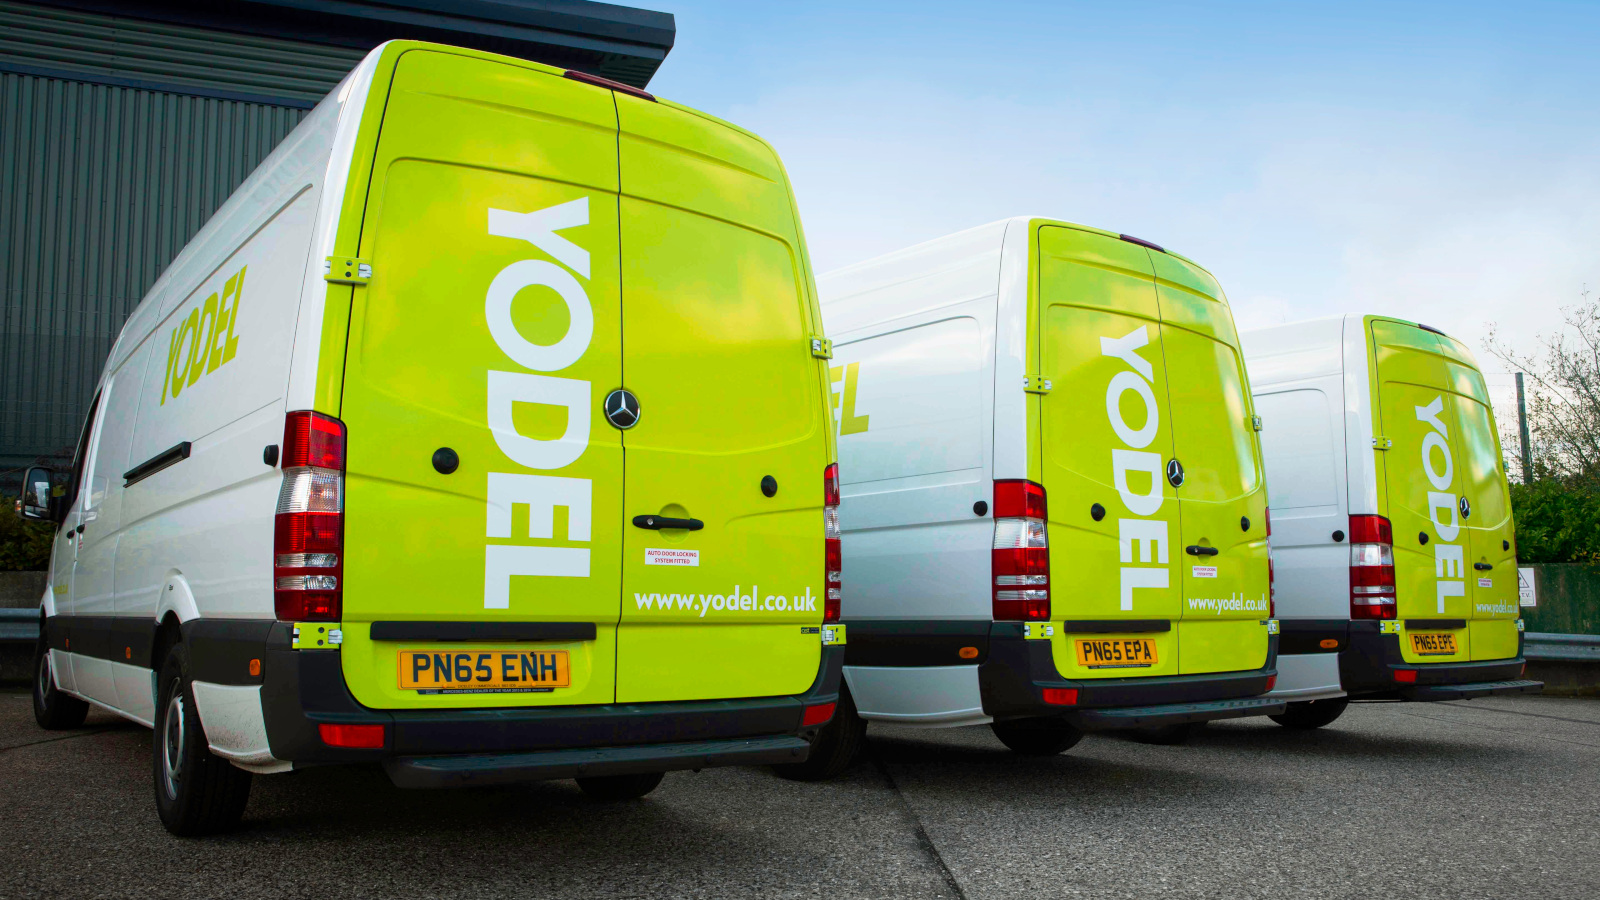 Services for the U.K.-based Yodel delivery service company have been disrupted due to a cyberattack that caused delays in parcel distribution and trac